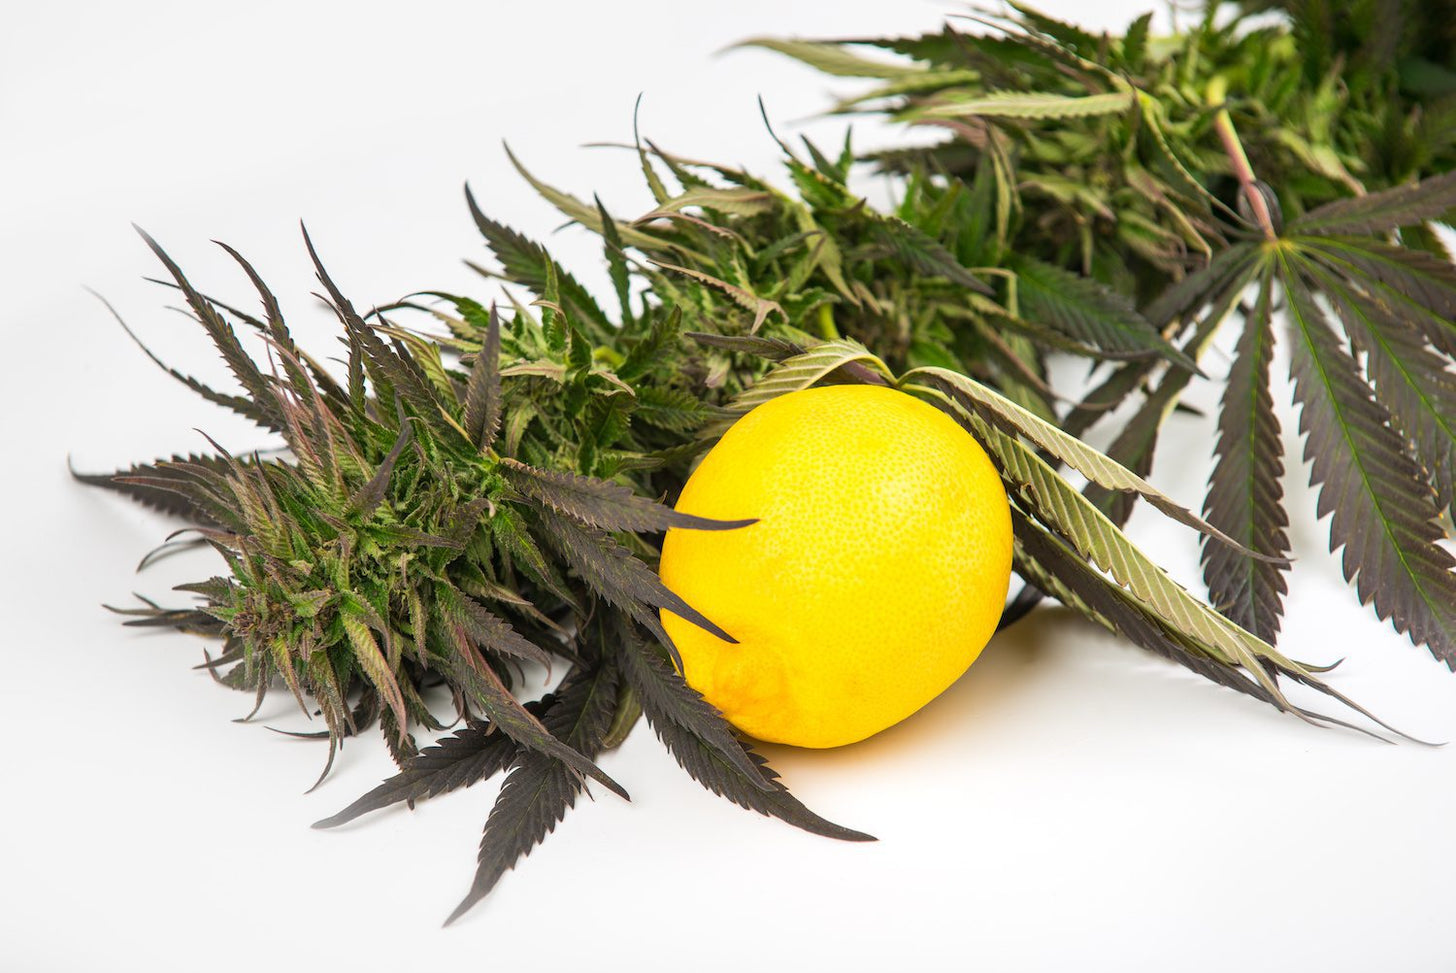 A large stalk and leaves of hemp next to a bright yellow lemon